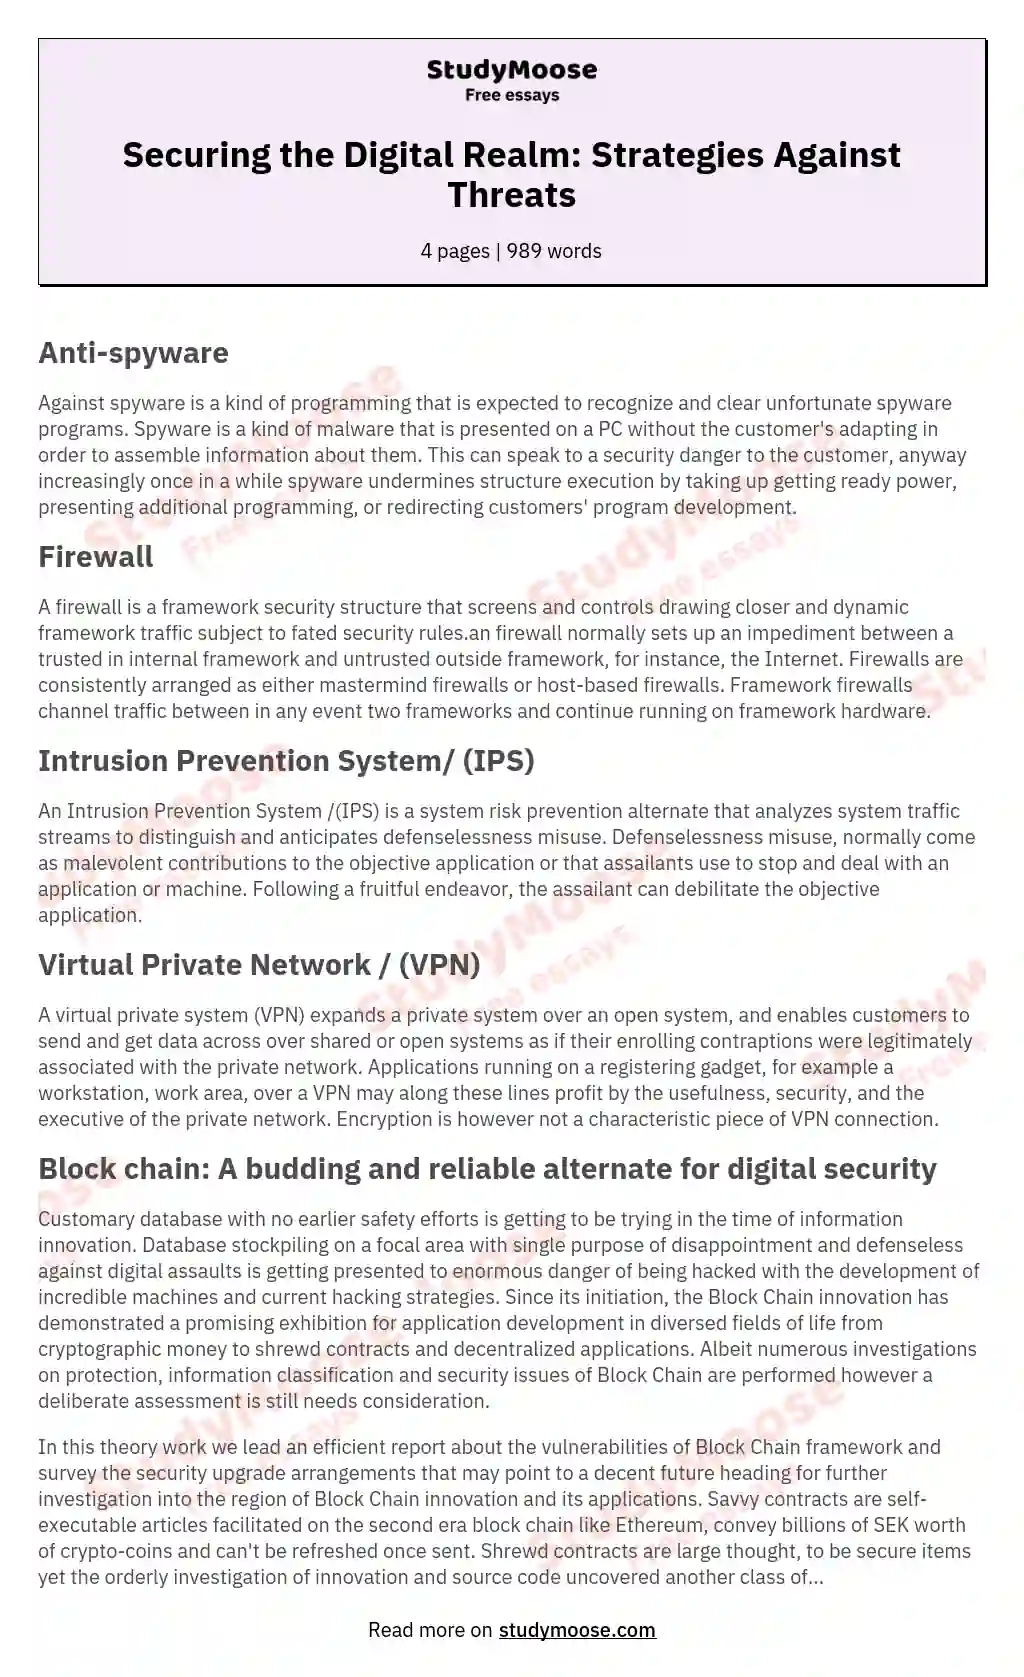 Securing the Digital Realm: Strategies Against Threats essay